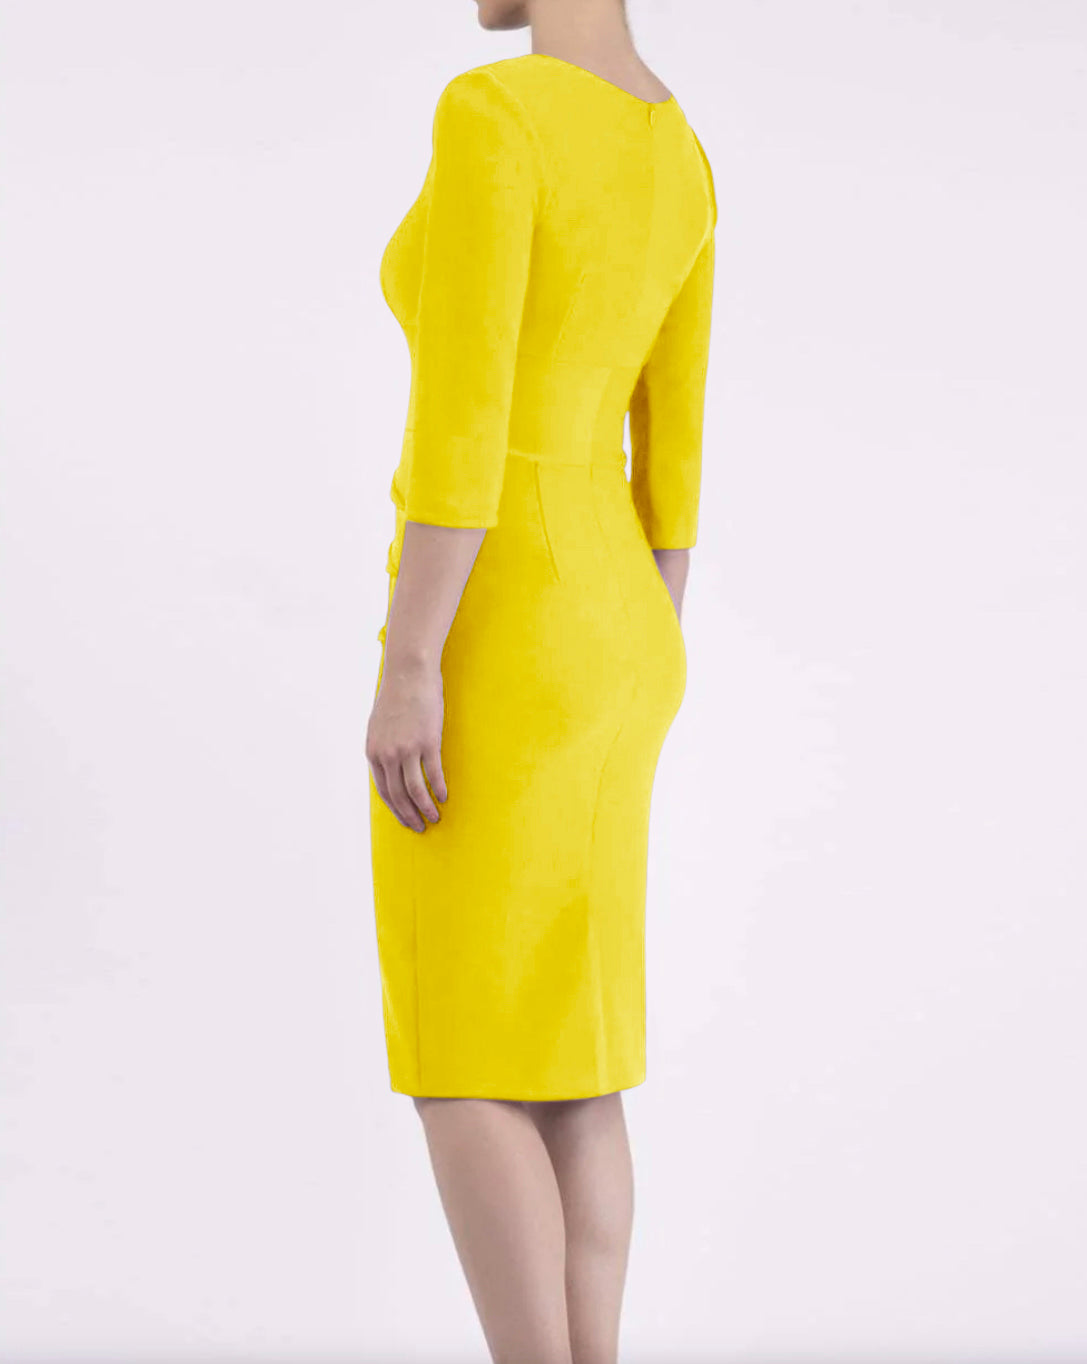 Women' Business Daphne 3/4 Sleeve Dress - Blazing Yellow NORA GARDNER | OFFICIAL STORE for work and office